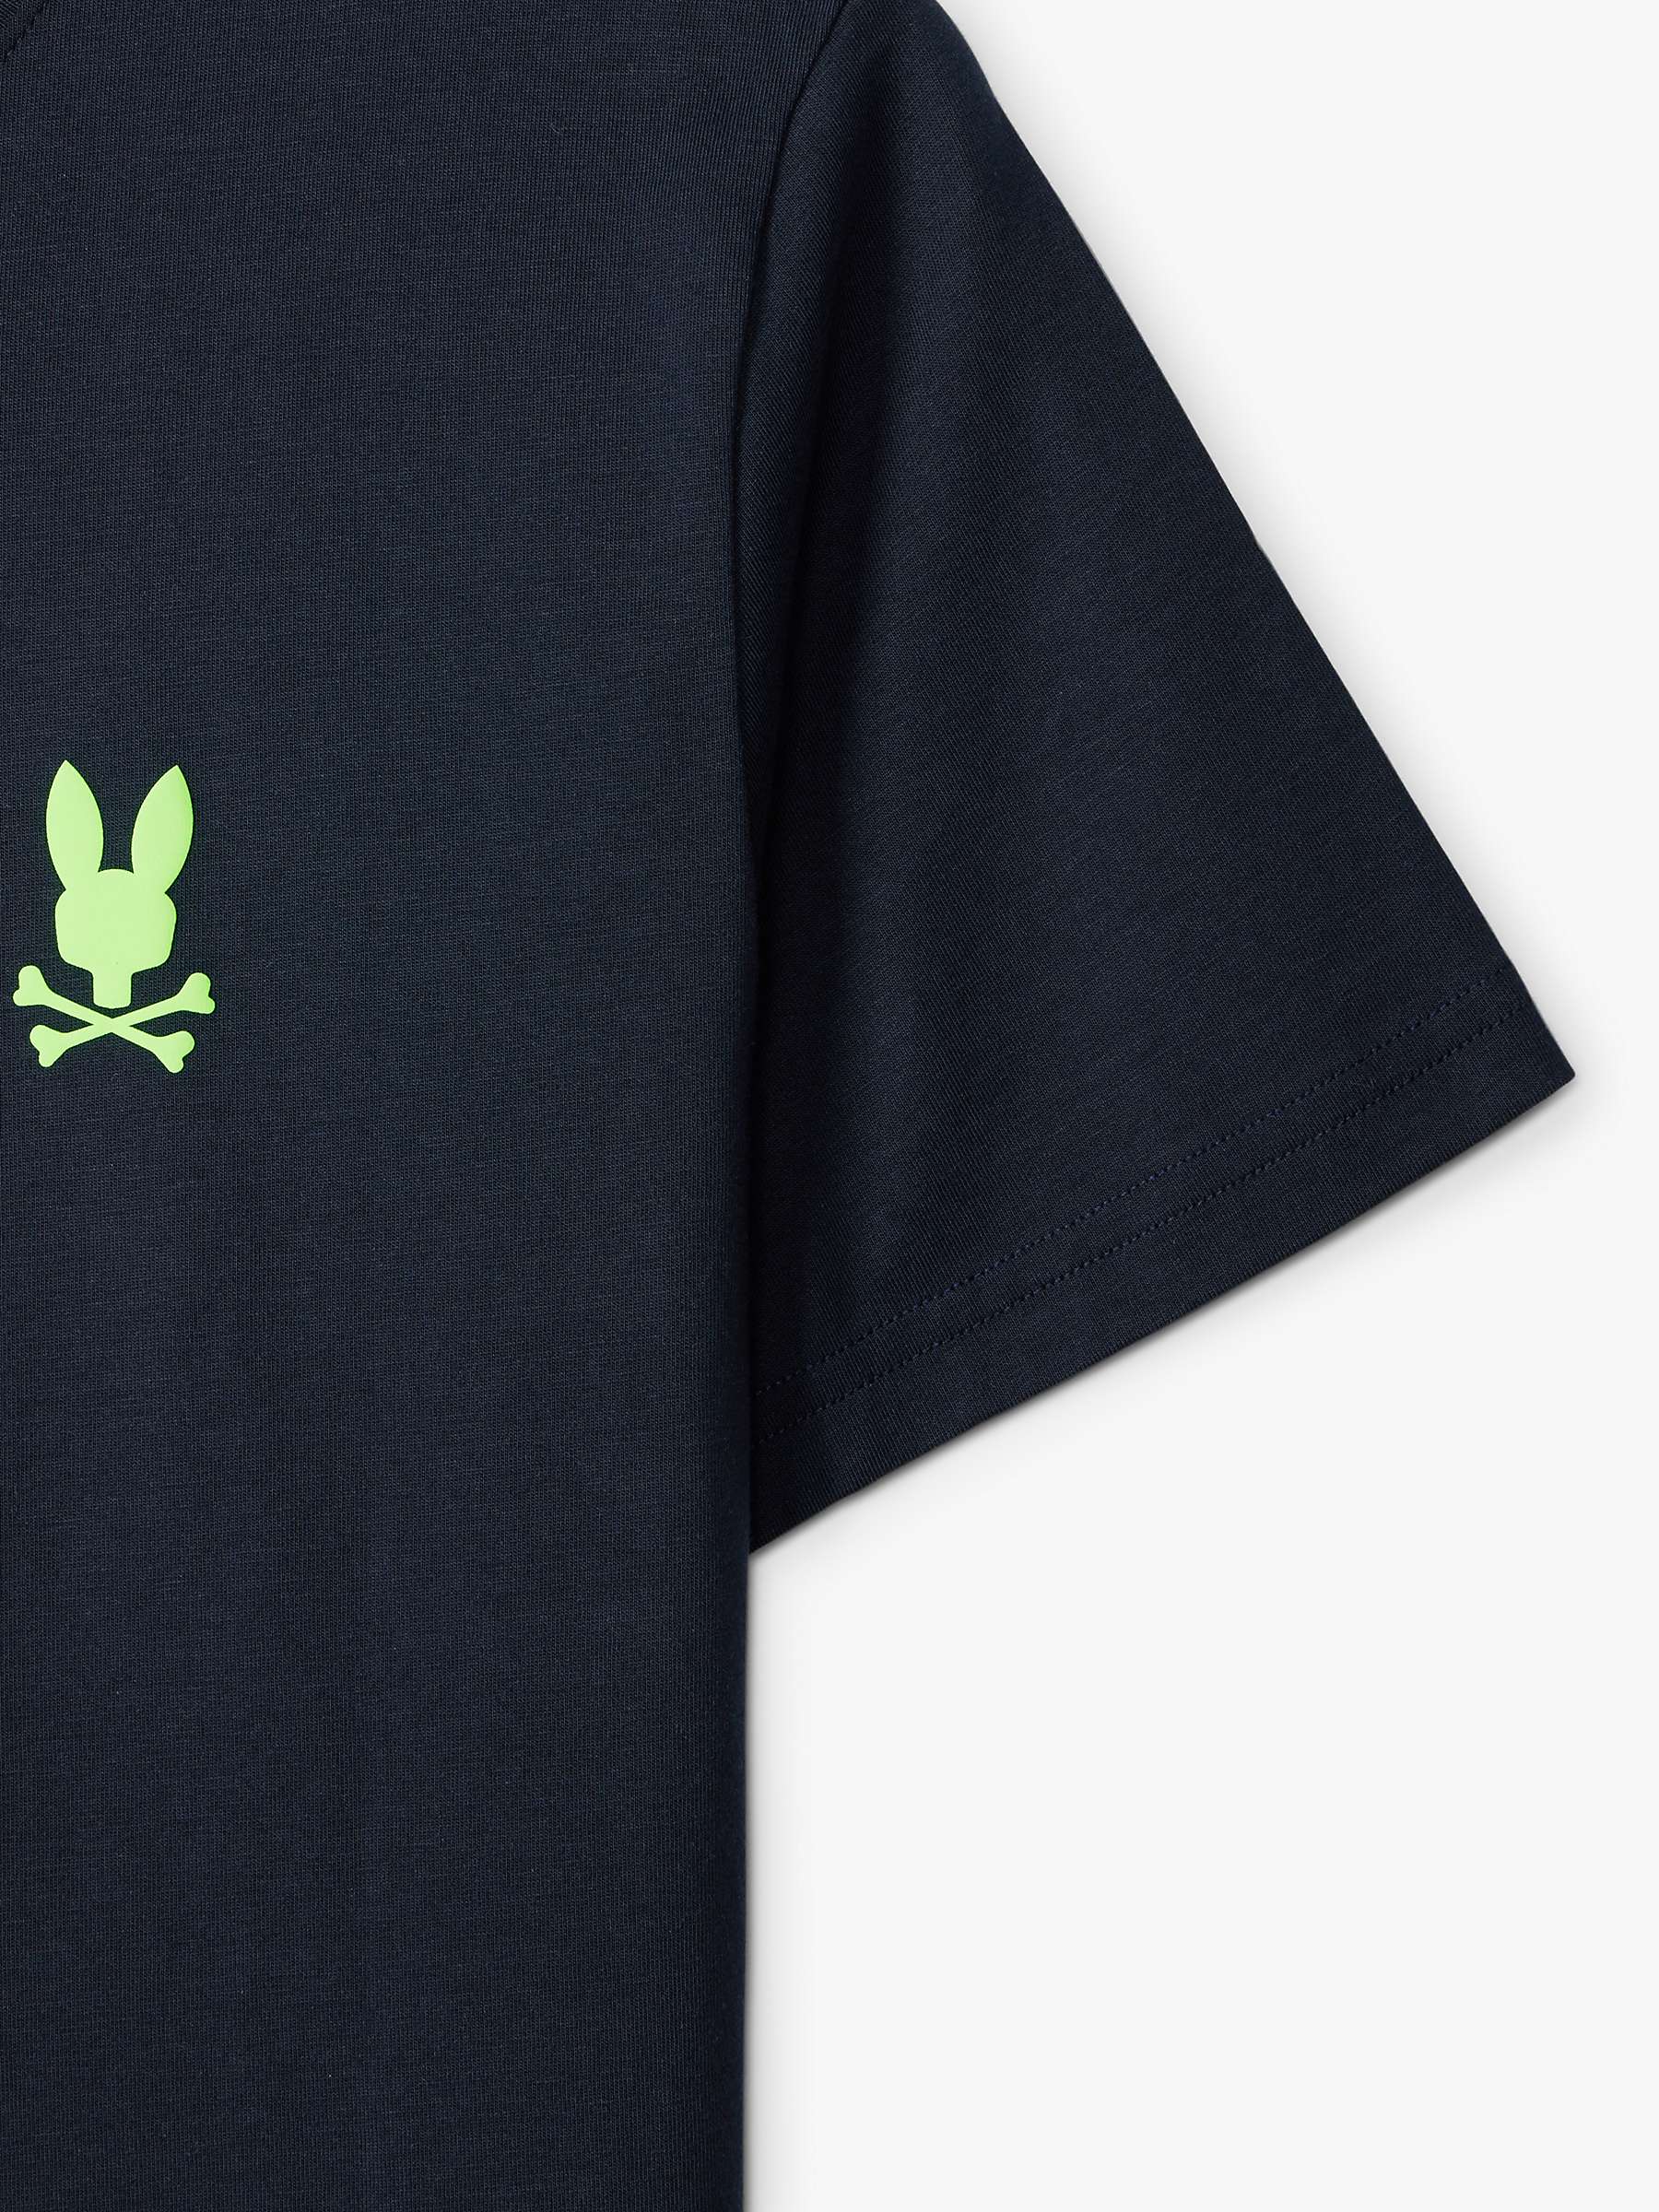 Buy Psycho Bunny Sloan Back Graphic T-Shirt Online at johnlewis.com